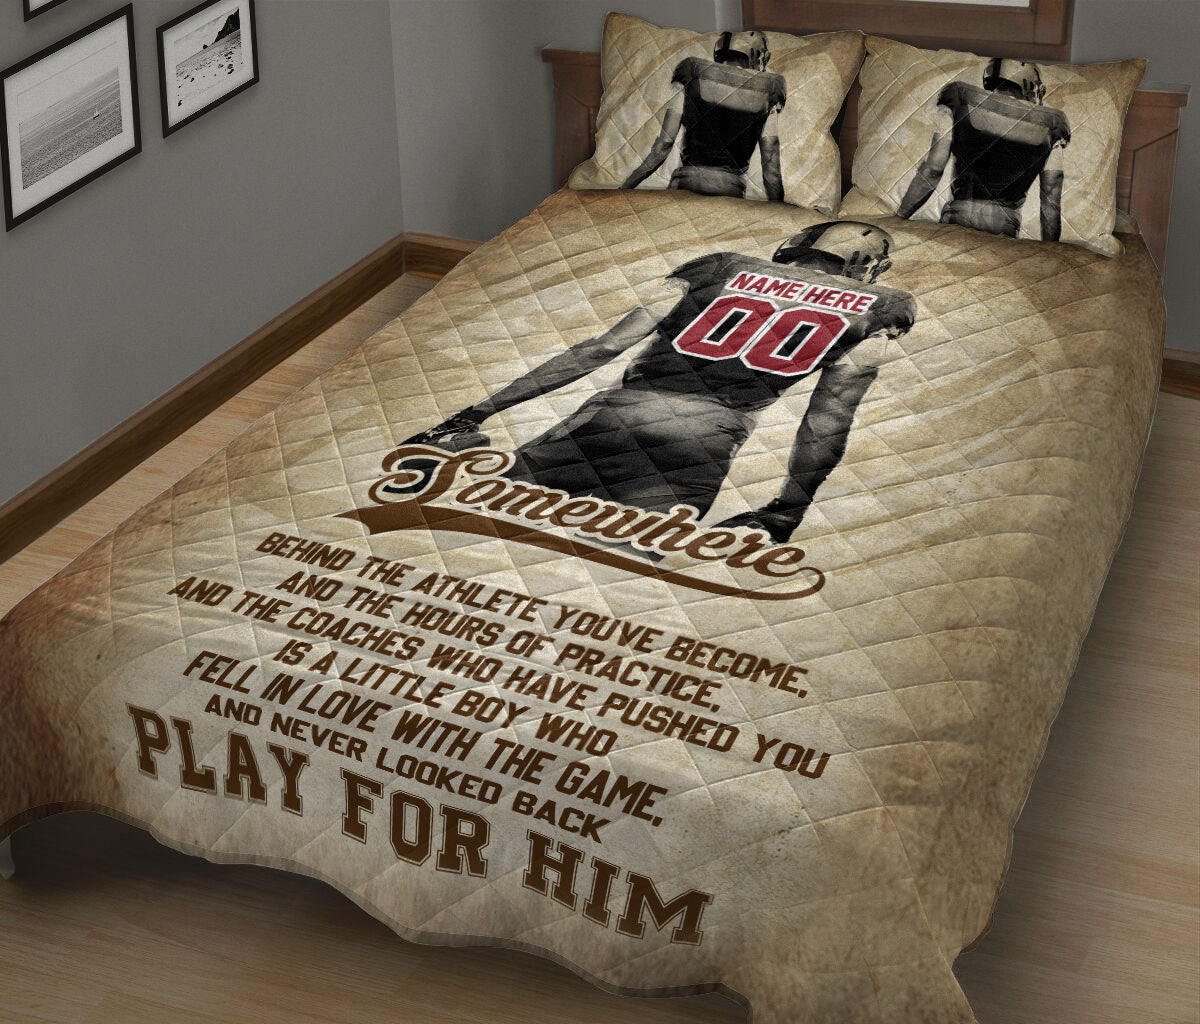 Ohaprints-Quilt-Bed-Set-Pillowcase-American-Football-Sports-Play-For-Him-Custom-Personalized-Name-Number-Blanket-Bedspread-Bedding-75-King (90'' x 100'')